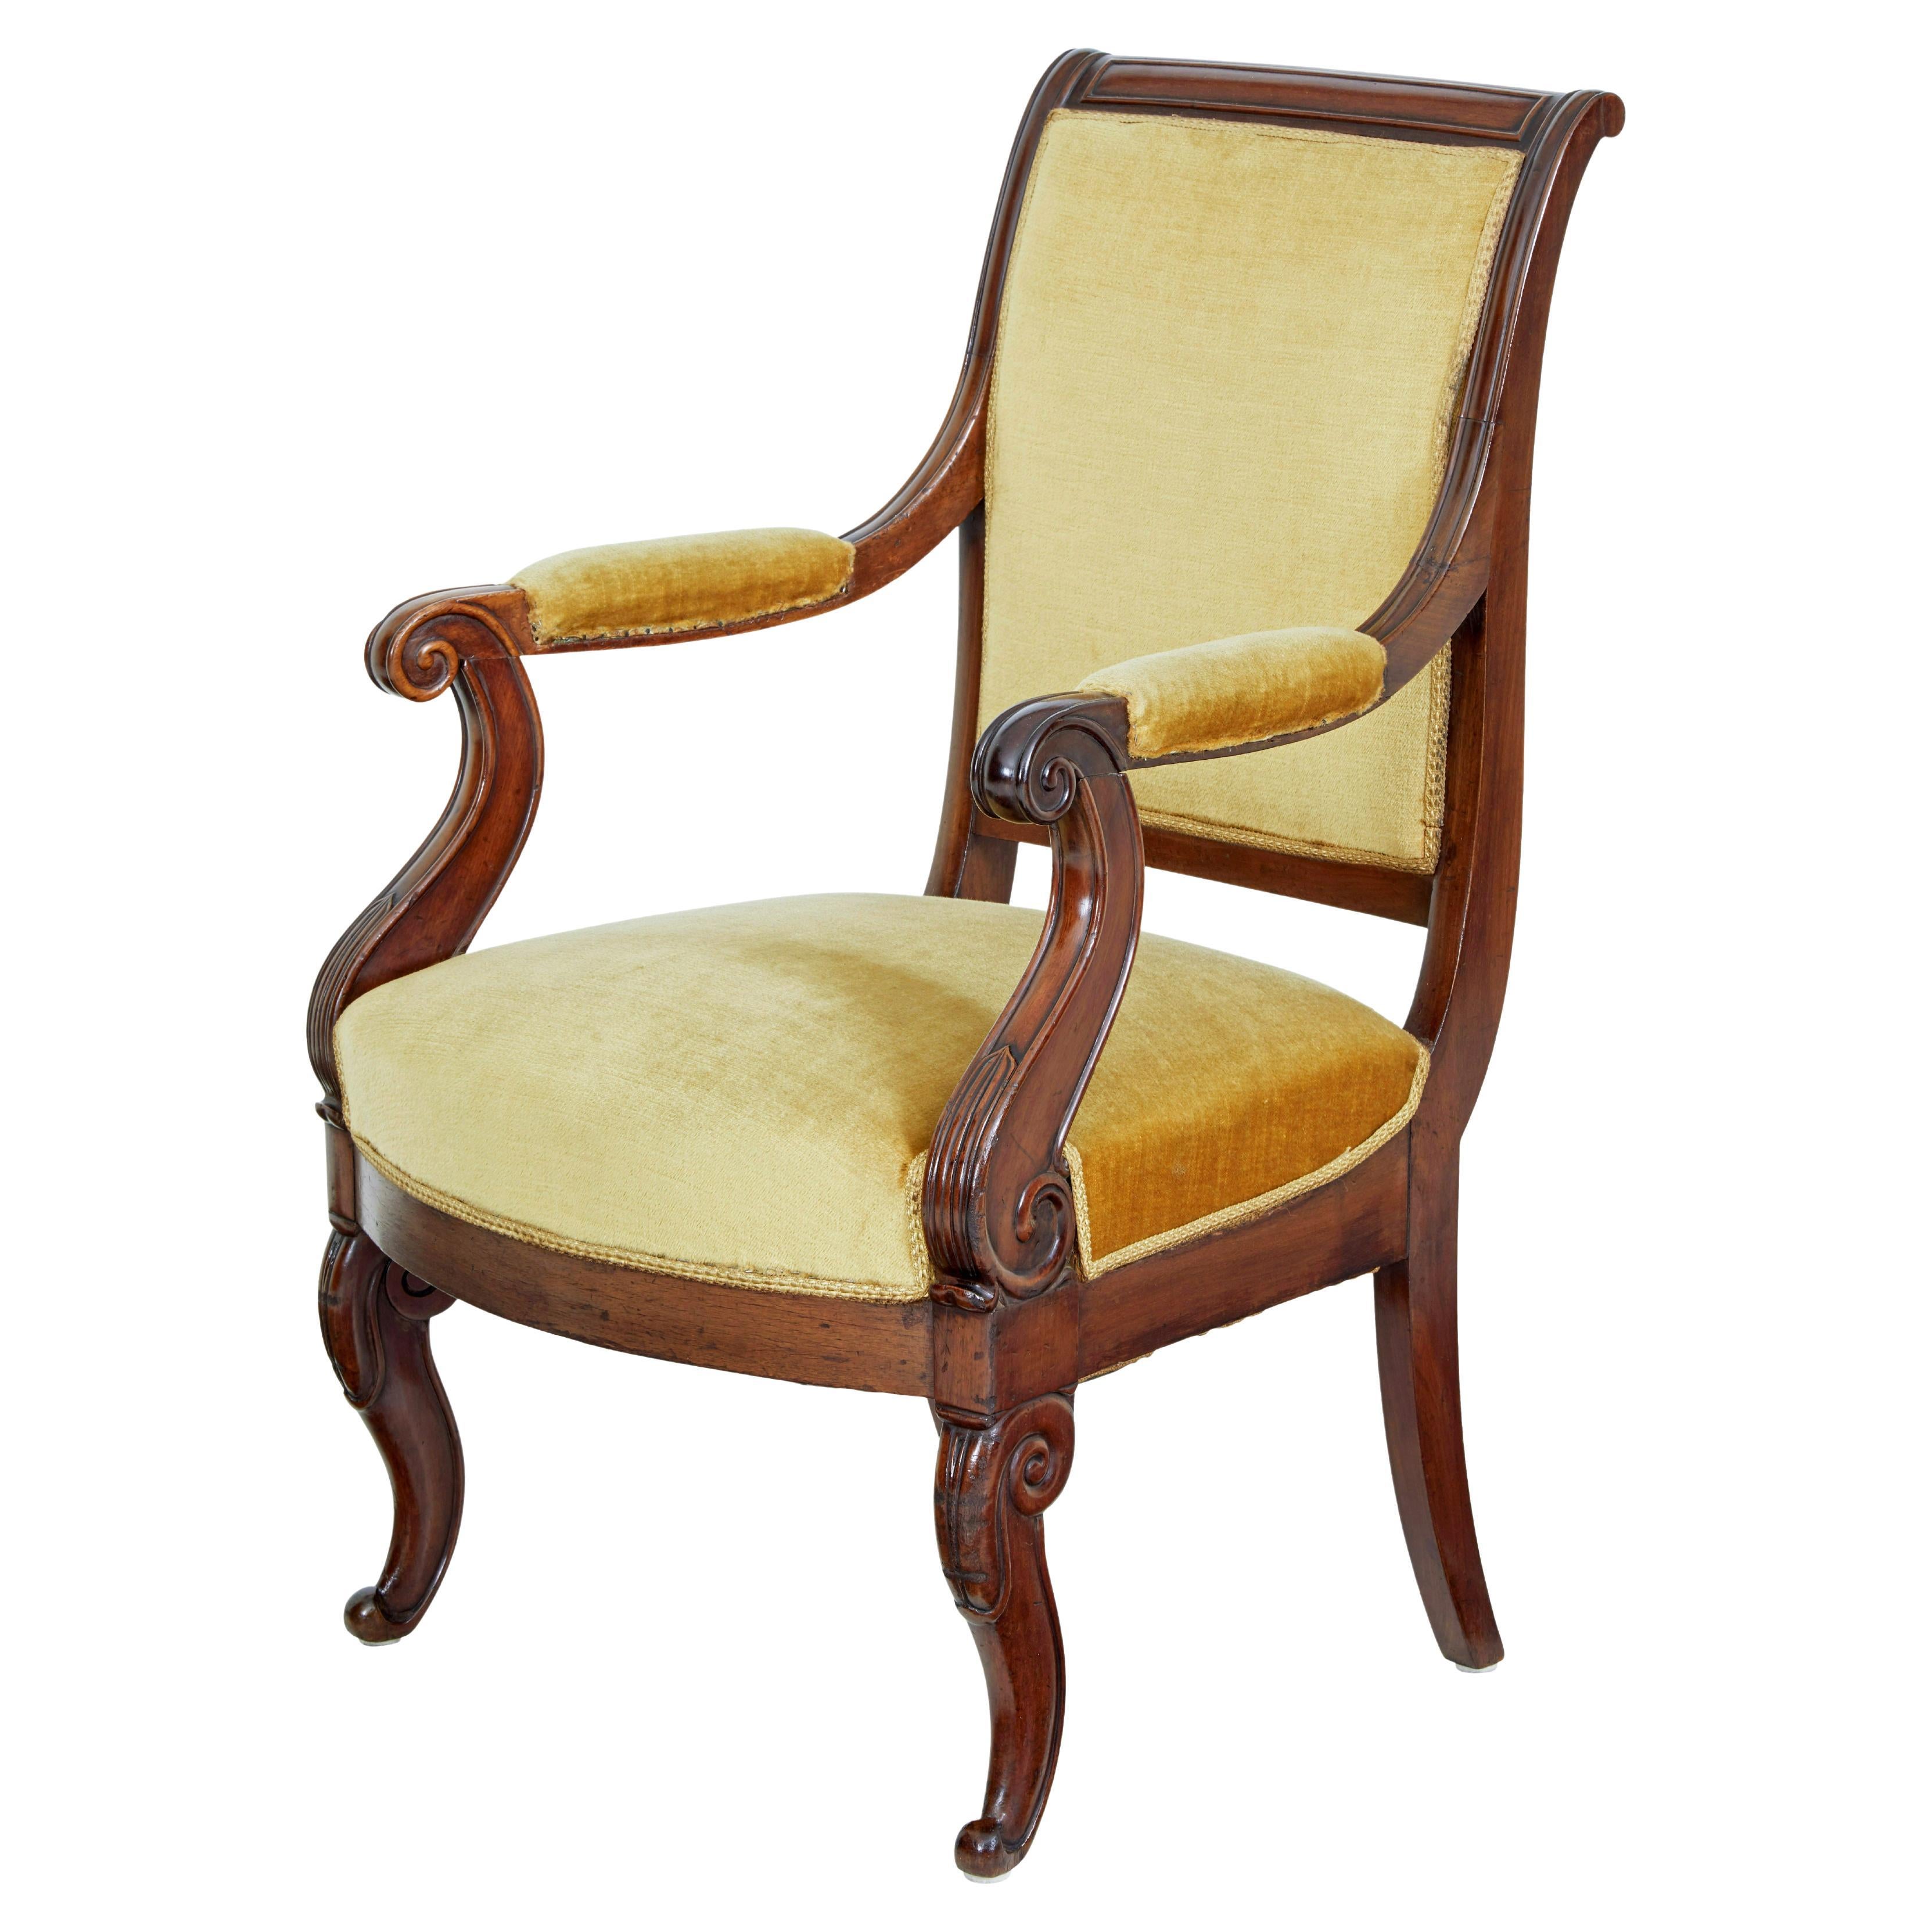 19th century French empire mahogany armchair For Sale